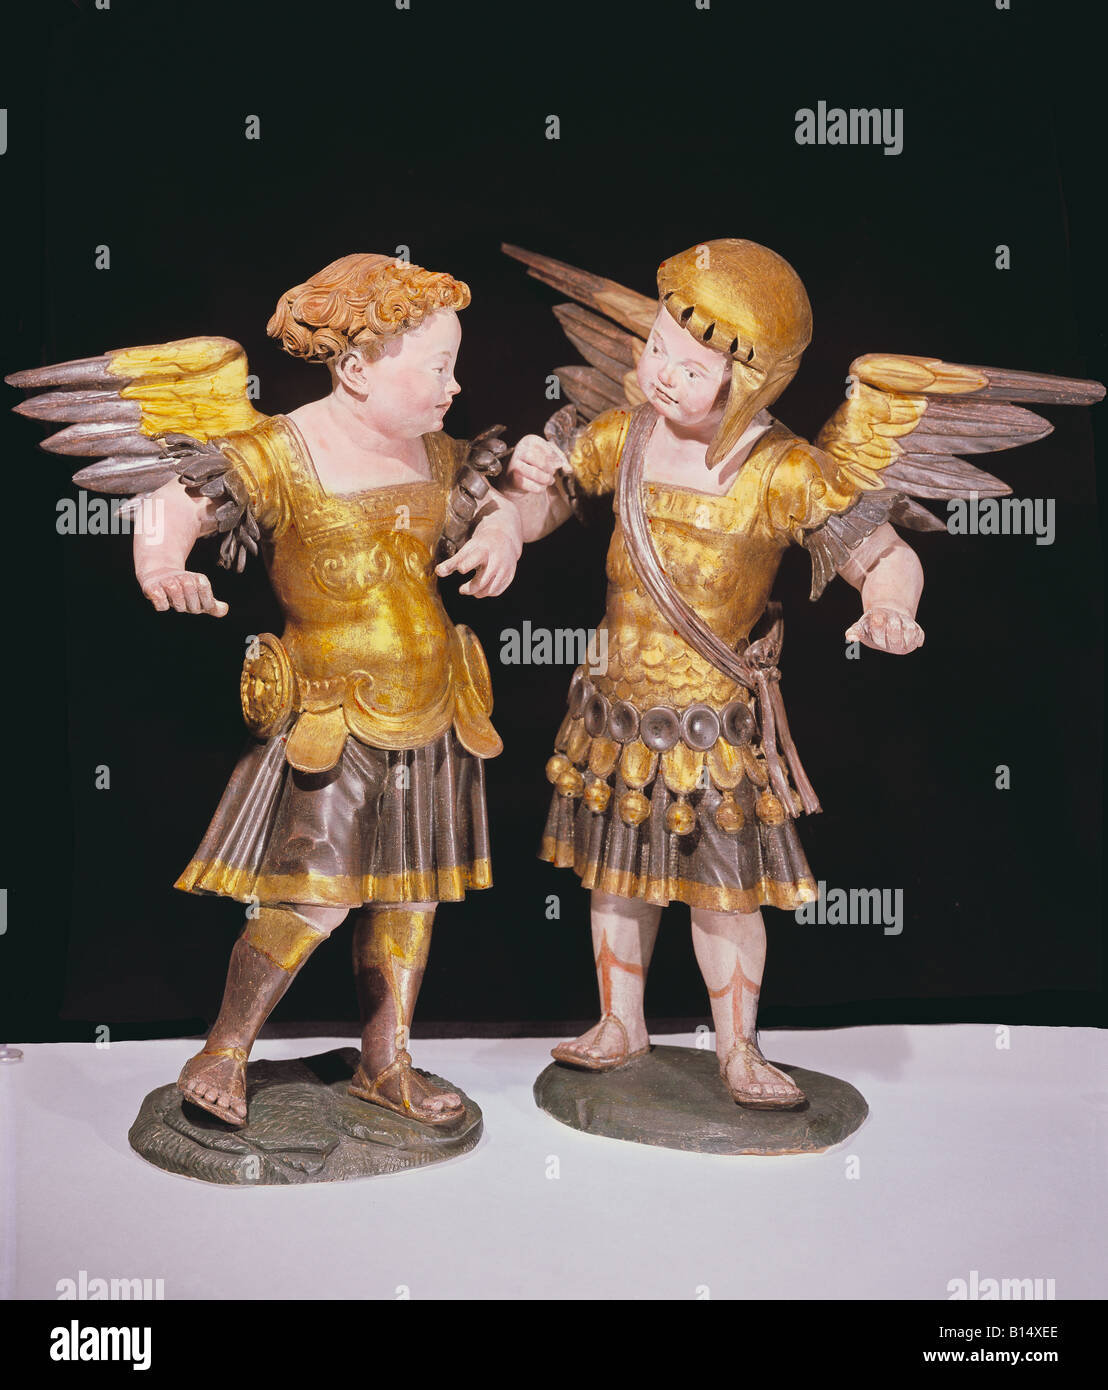 fine arts, sculpture, 'Zwei Puttos in Ruestung' (Two putti in armour), circa 1530 / 1540, wood, hand-carved, painted, gilded, height 44 cm and 45 cm, formerly church 'Unsere liebe Frau' (Our beloved woman), Ingolstadt, Germany, Bavarian National Museum, Munich, Artist's Copyright has not to be cleared Stock Photo